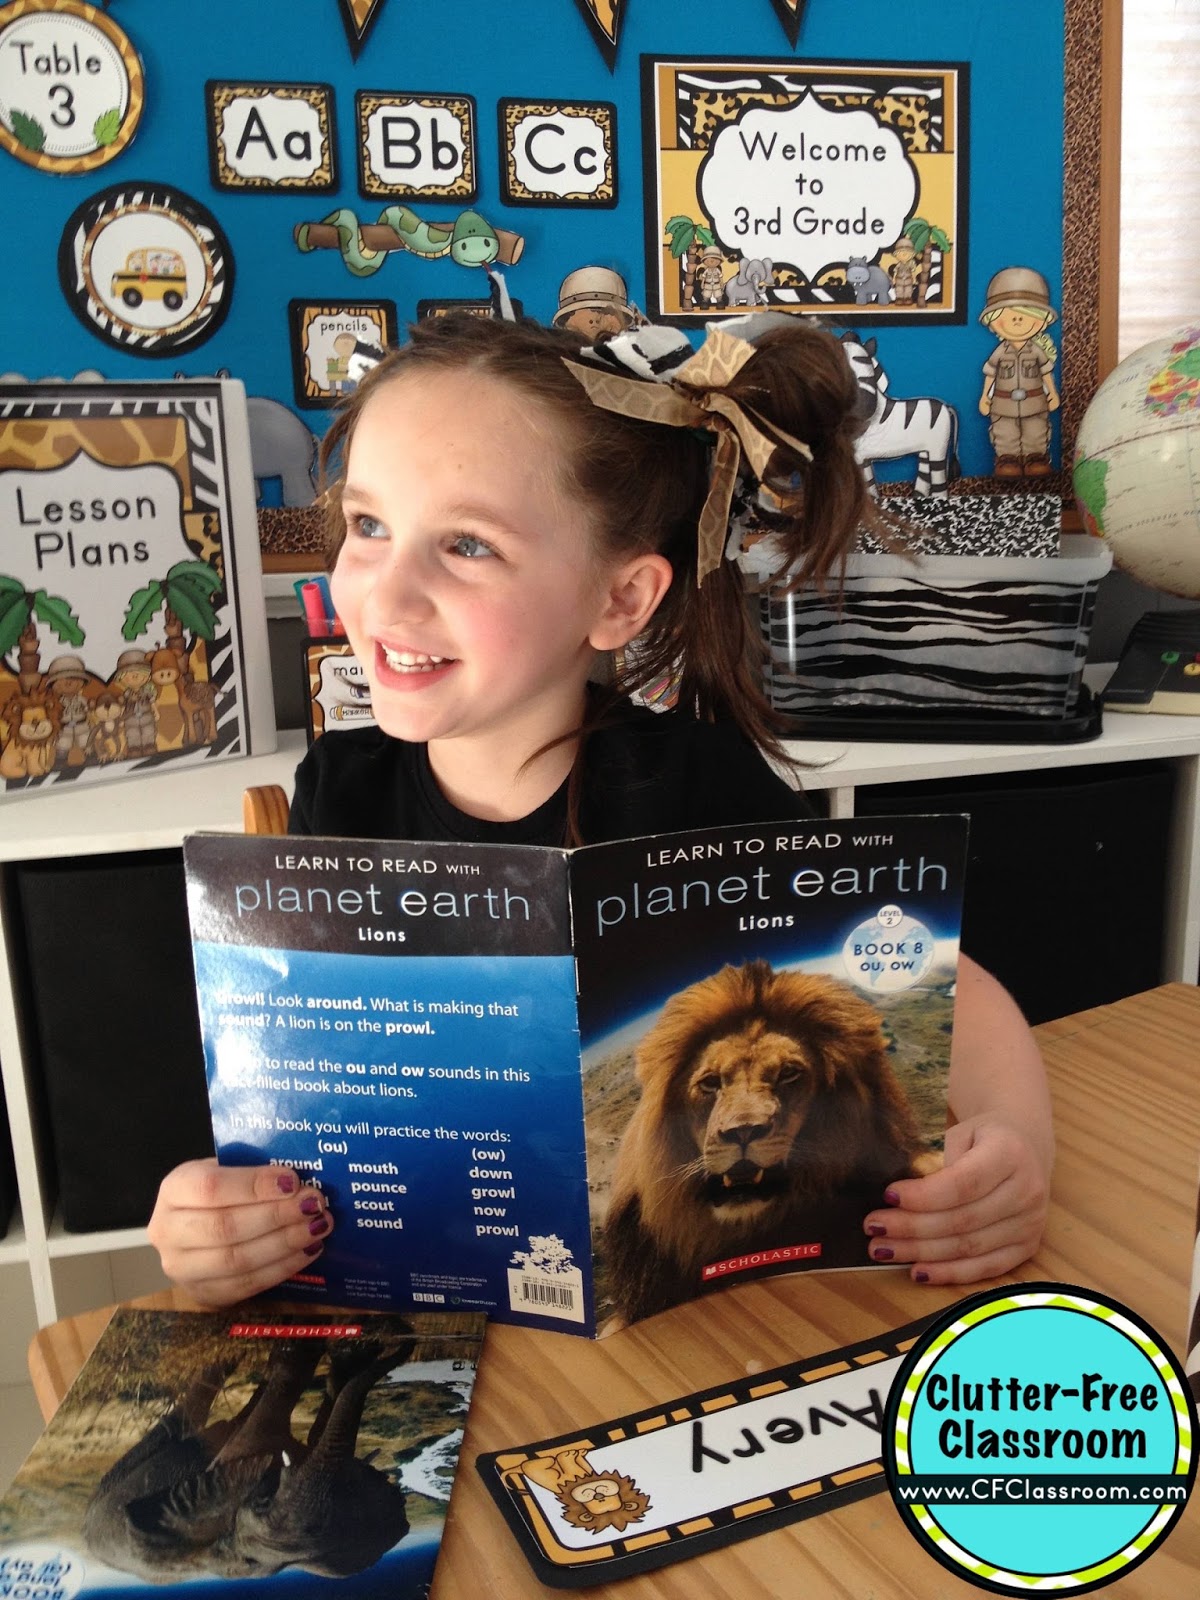 Are you planning a Jungle Safari themed classroom or thematic unit? This blog post provides great decoration tips and ideas for the best Jungle Safari theme yet! It has photos, ideas, supplies & printable classroom decor to will make set up easy and affordable. You can create a Jungle Safari theme on a budget!